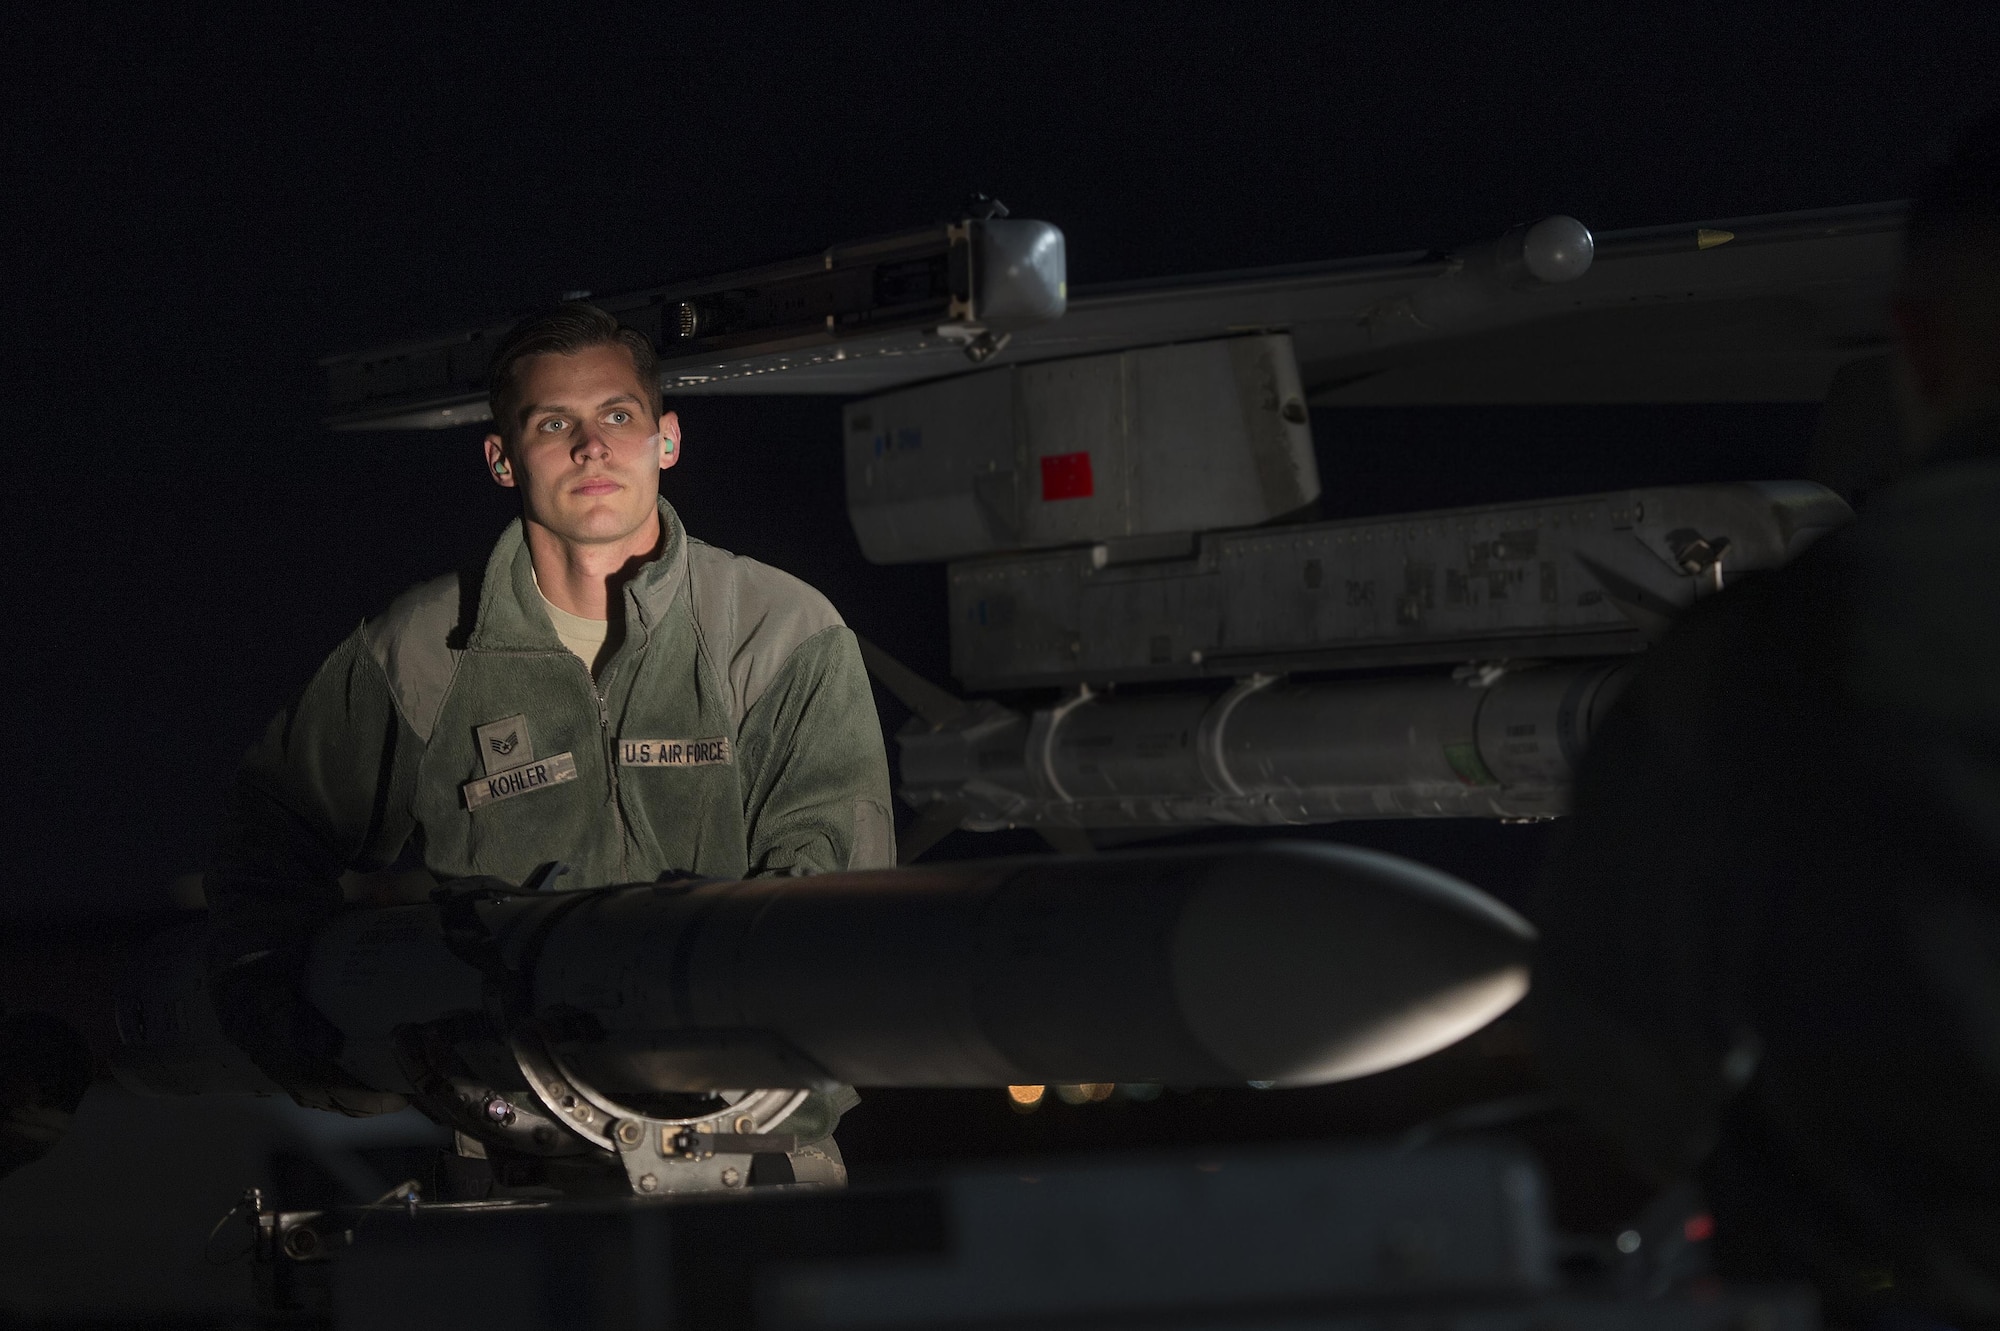 U.S. Air Force Staff Sgt. Jeffrey Kohler, 20th Aircraft Maintenance Squadron weapons load crew member, Shaw Air Force Base, S.C. removes an AIM-120 advanced medium-range air-to-air missile from an F-16CM Fighting Falcon in support of Red Flag 17-2 at Nellis Air Force Base, Nev., Feb. 28, 2017. While participating in Red Flag, weapons load crew members have the opportunity to work with live munitions as opposed to the dummy munitions they practice with at Shaw. (U.S. Air Force photo by Senior Airman Zade Vadnais)